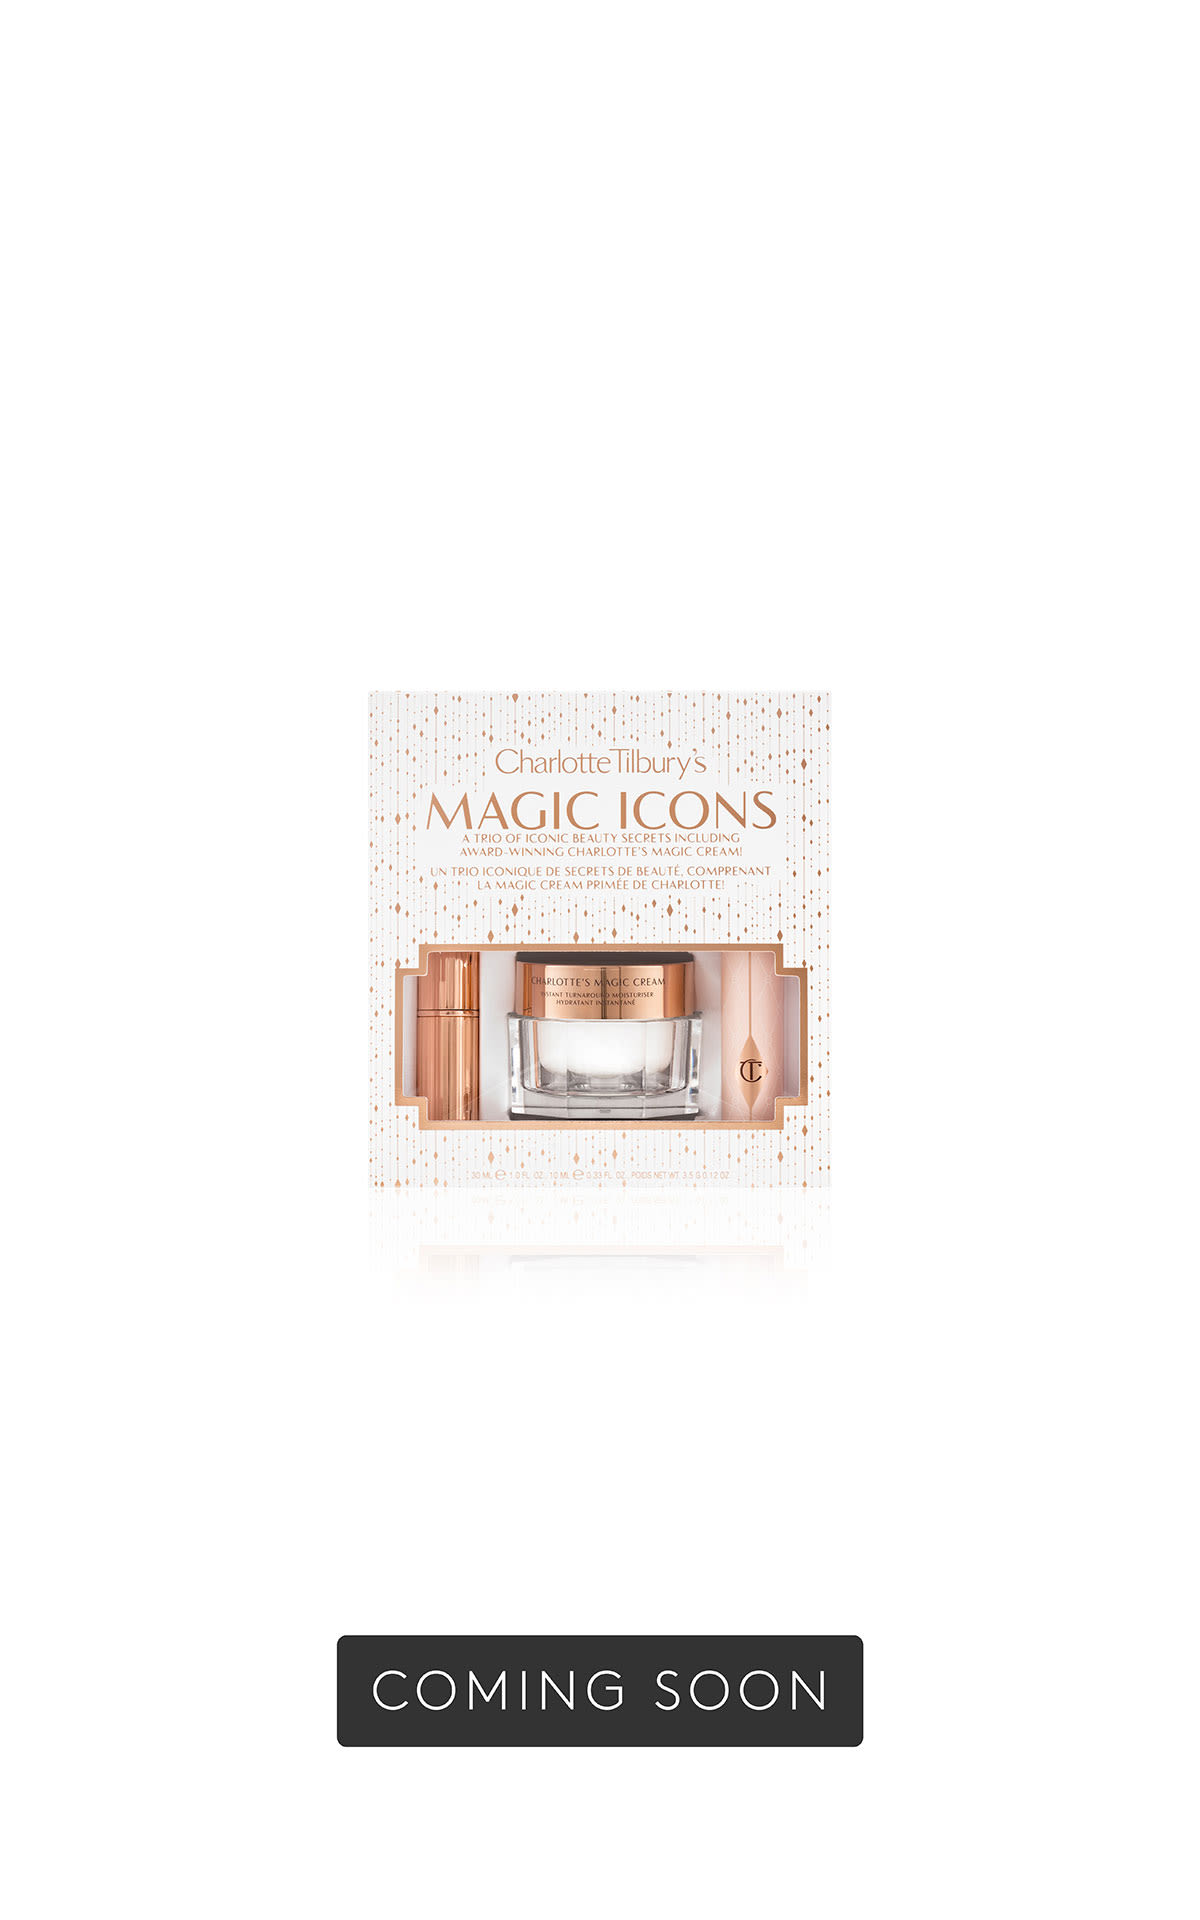 Charlotte Tilbury Charlotte Tilbury's magic icons from Bicester Village